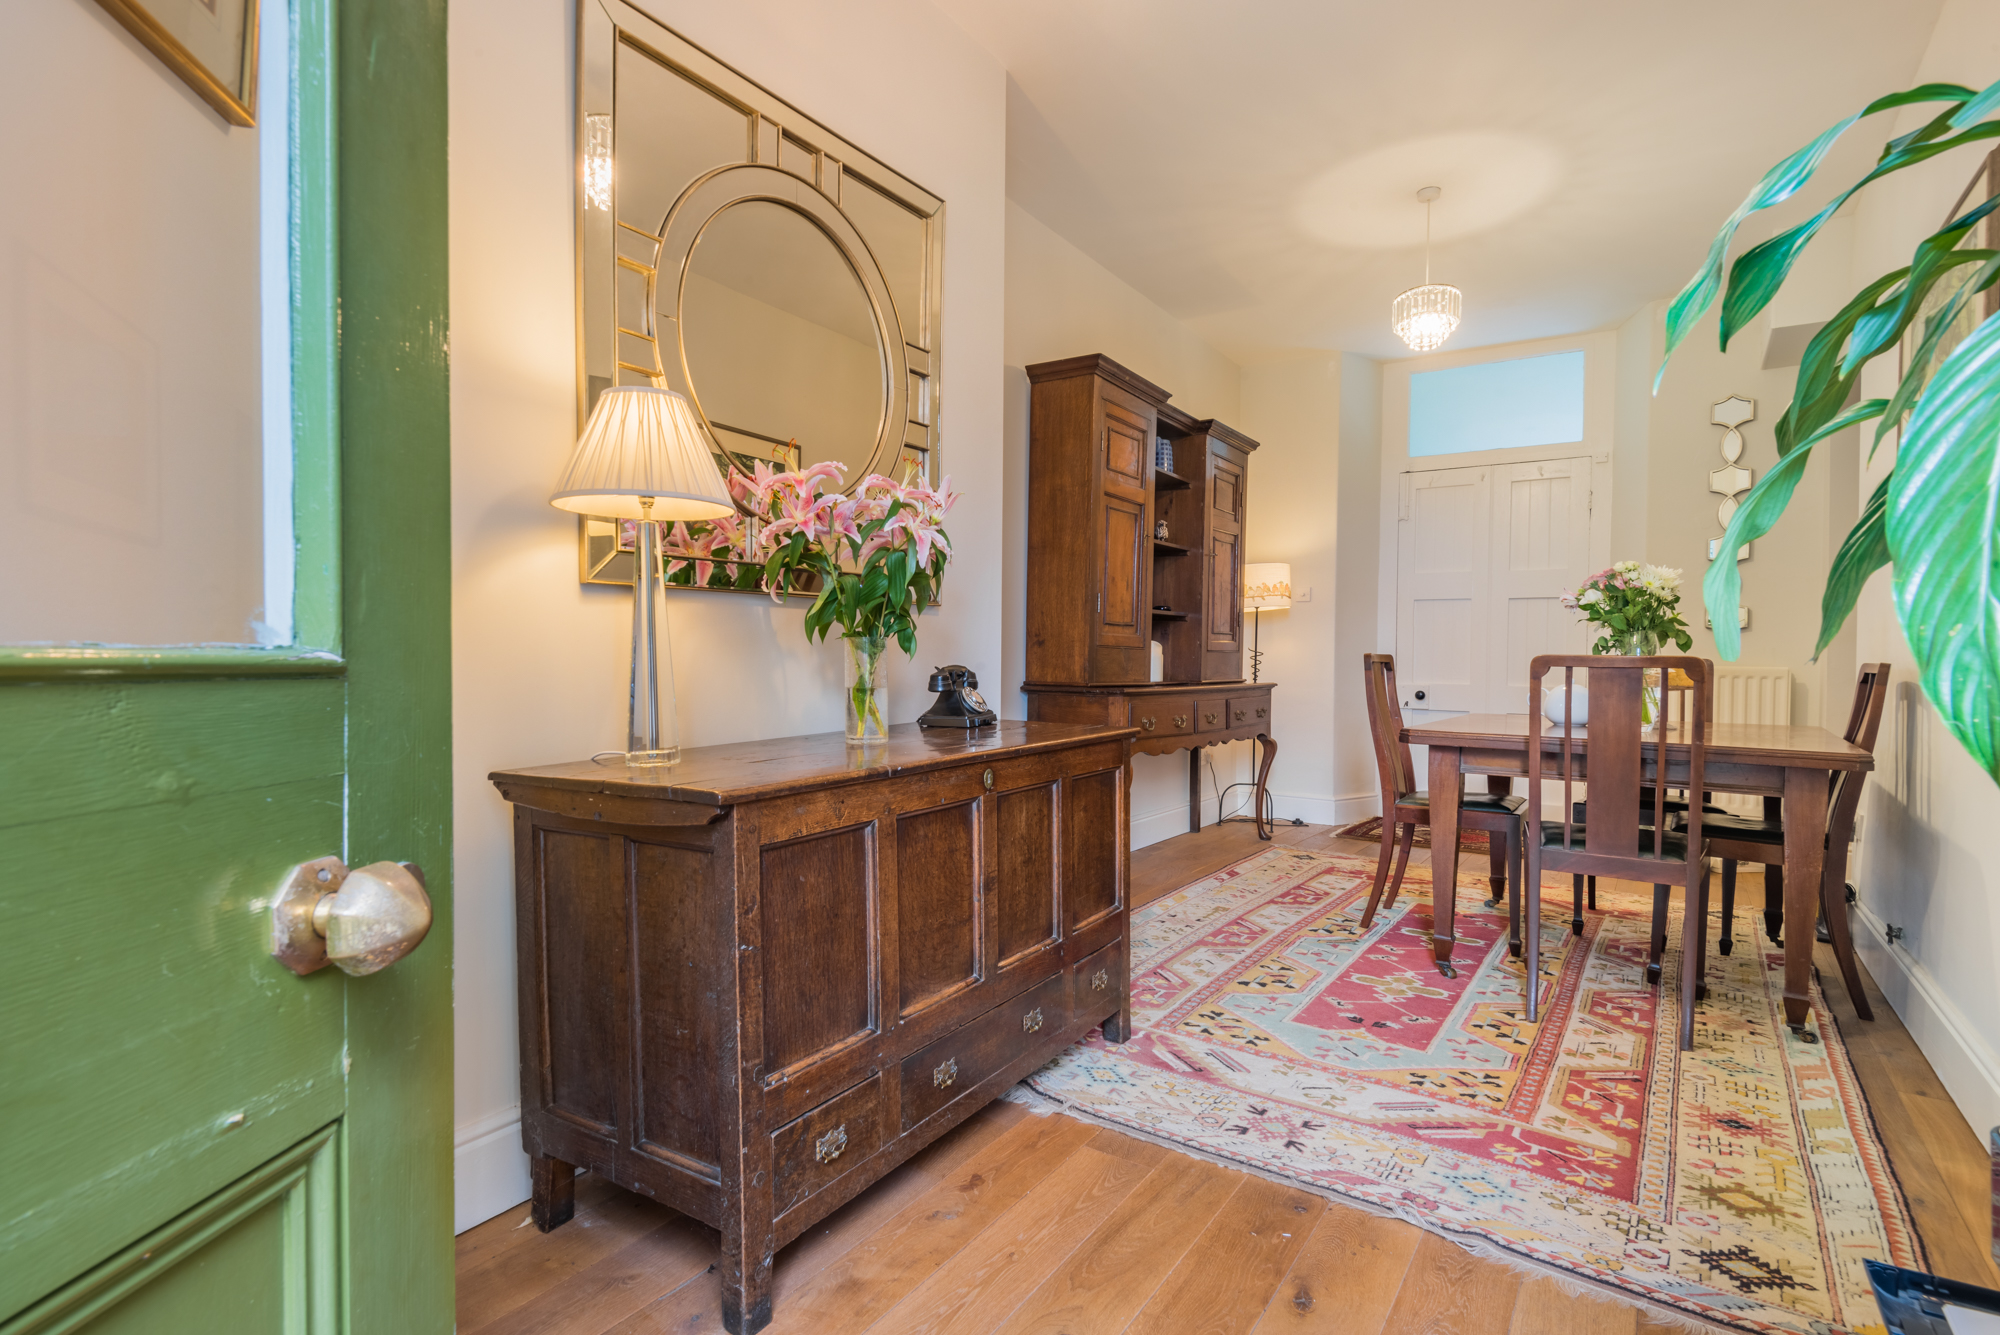 Ripon home for sale by Alexander Gibson Estate Agents